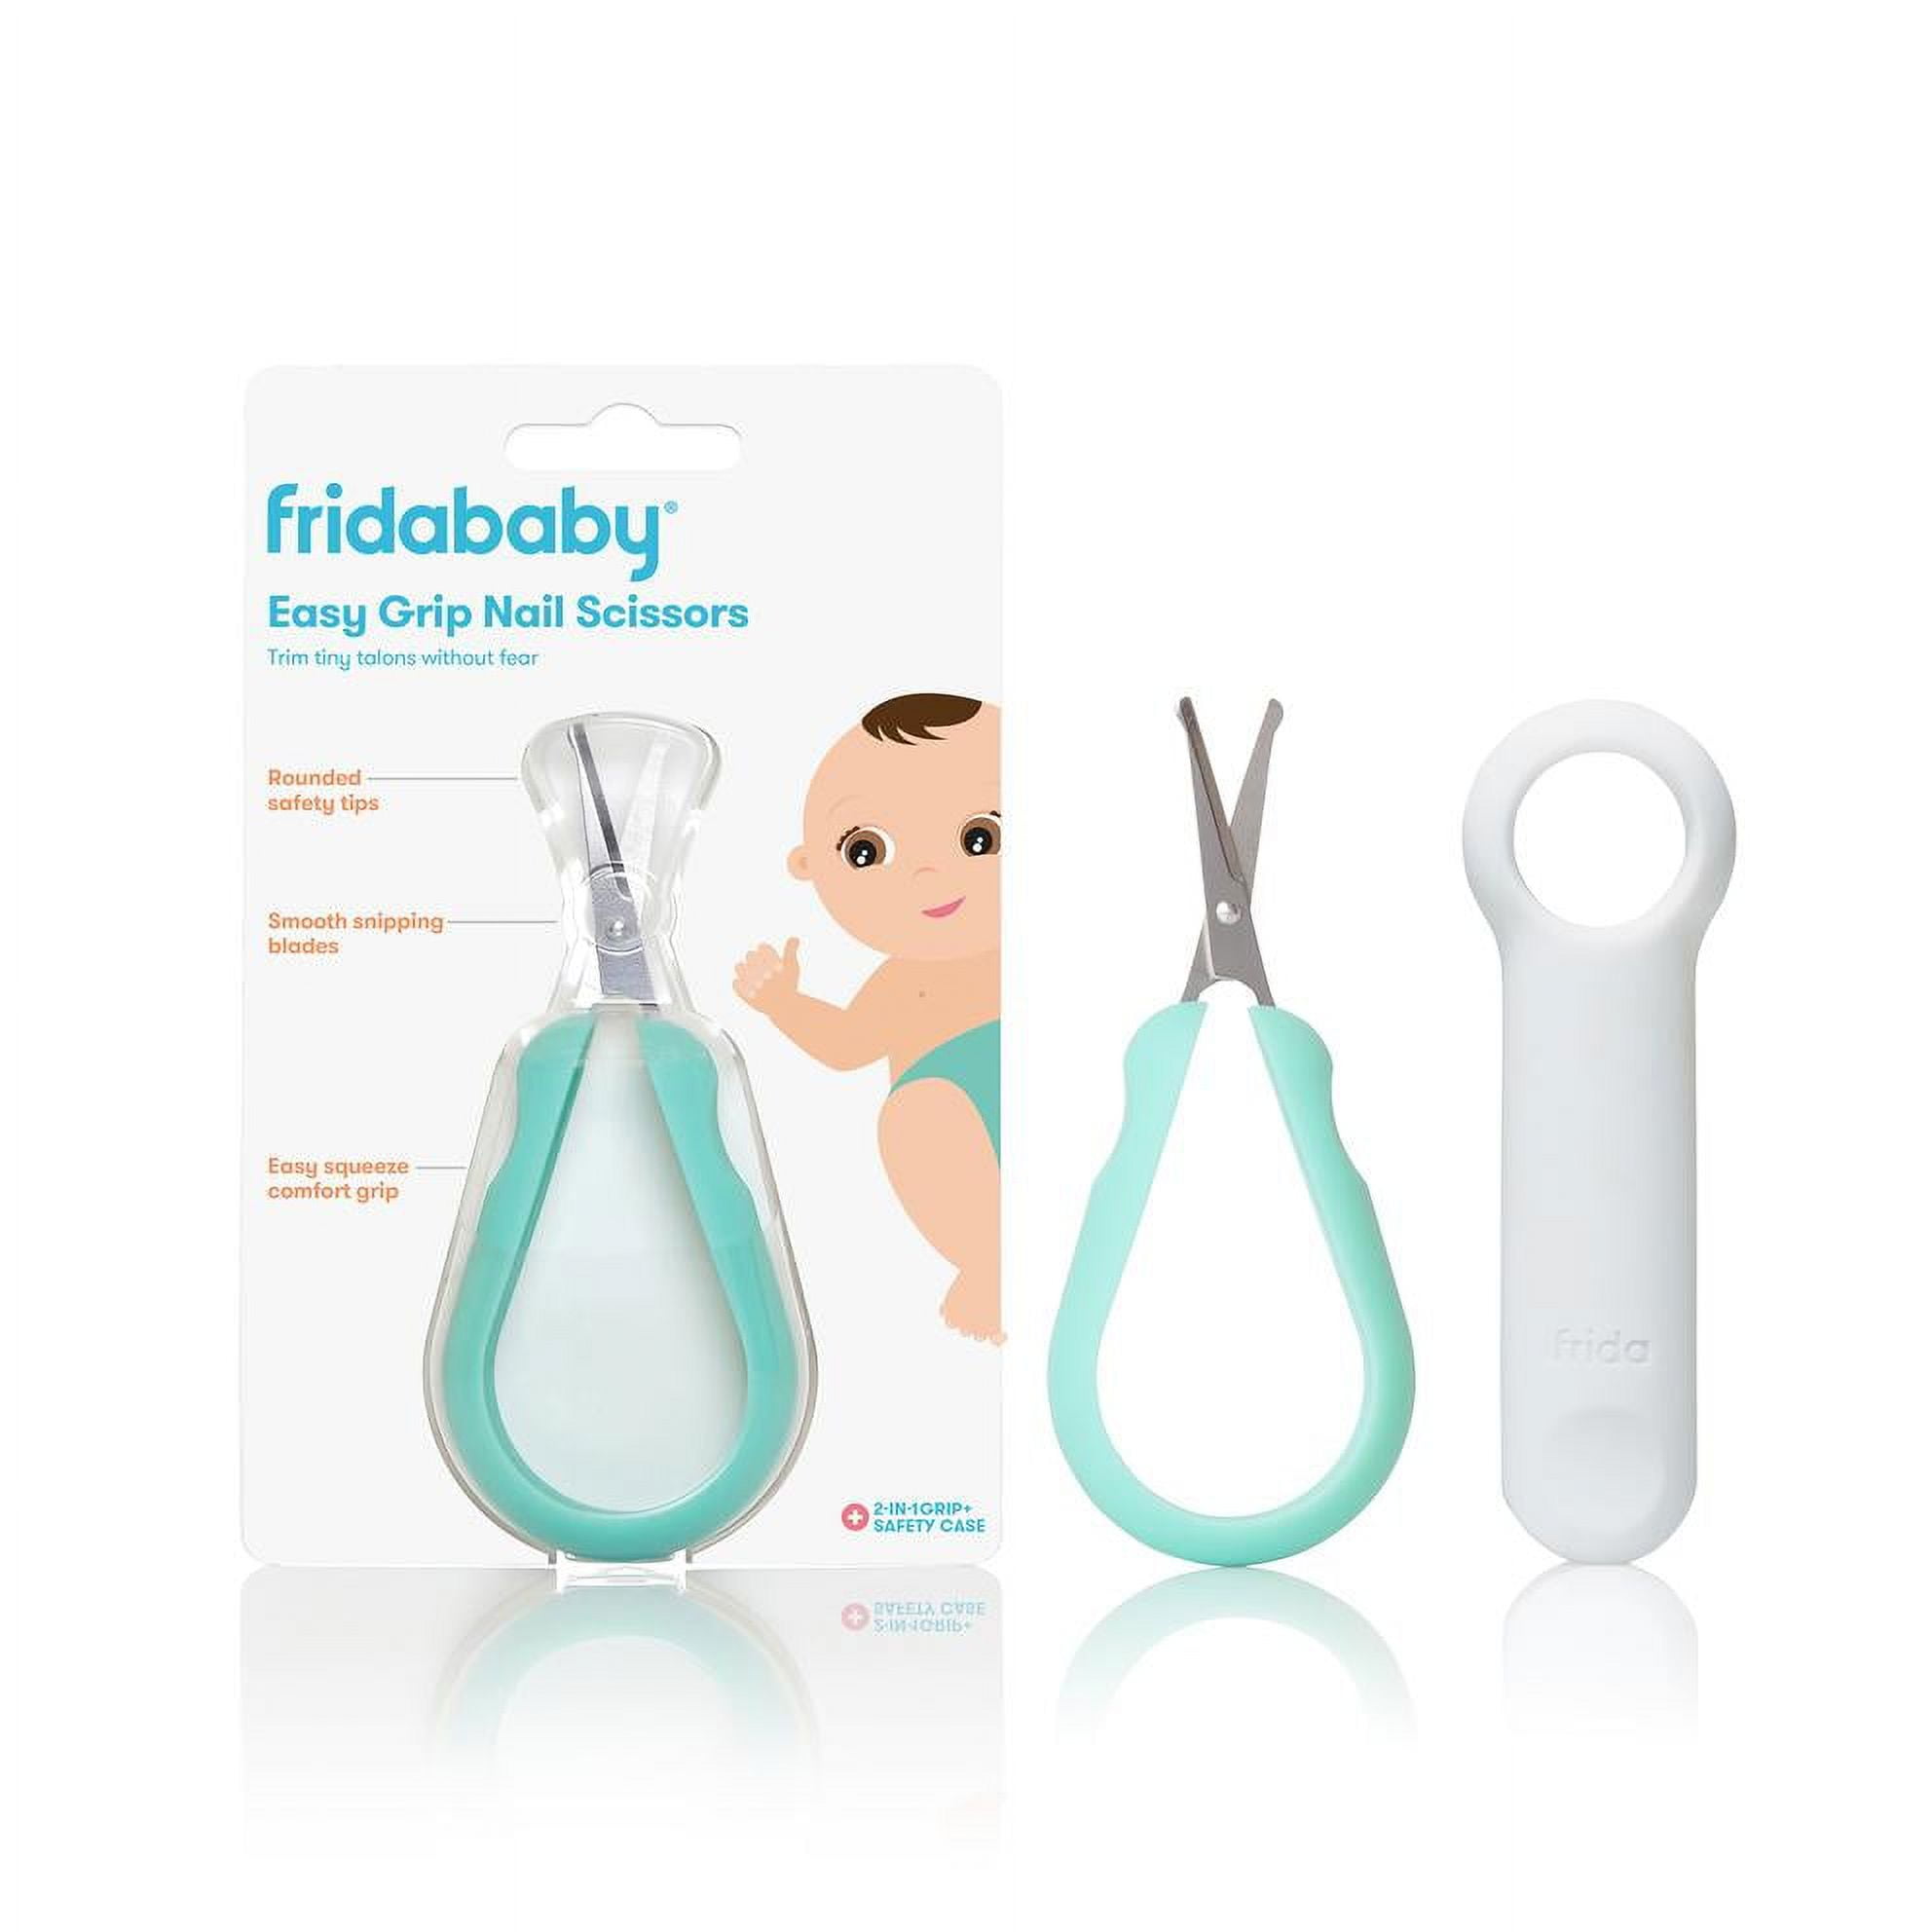 FridaBaby 3-in-1 Nose, Nail + Ear Picker by Frida Baby the Makers